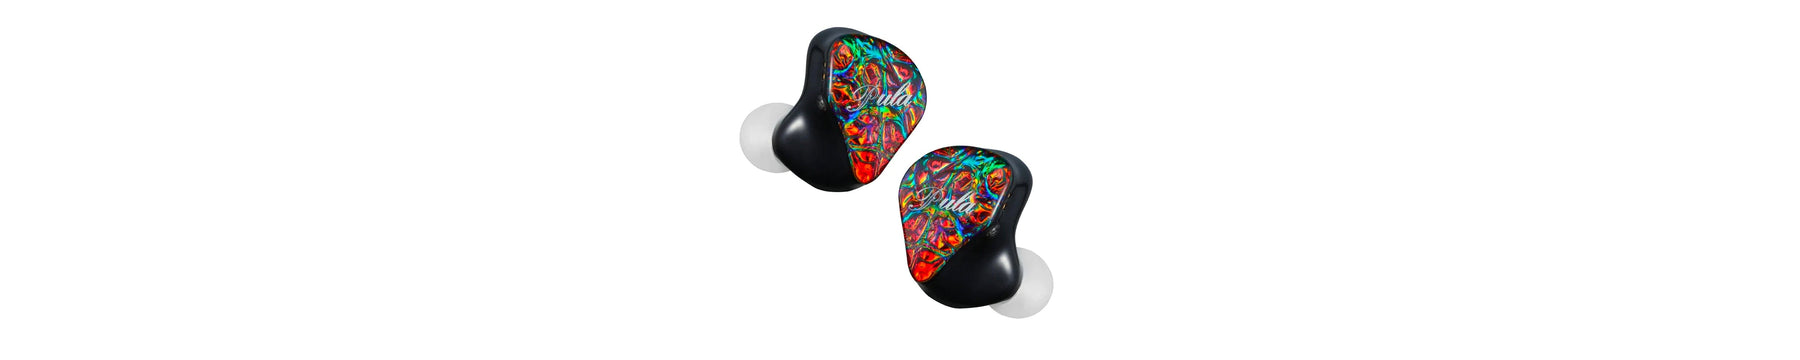 PULA Introduces PA01 and PA02 High-Performance In-Ear Monitors With Stunning Looks